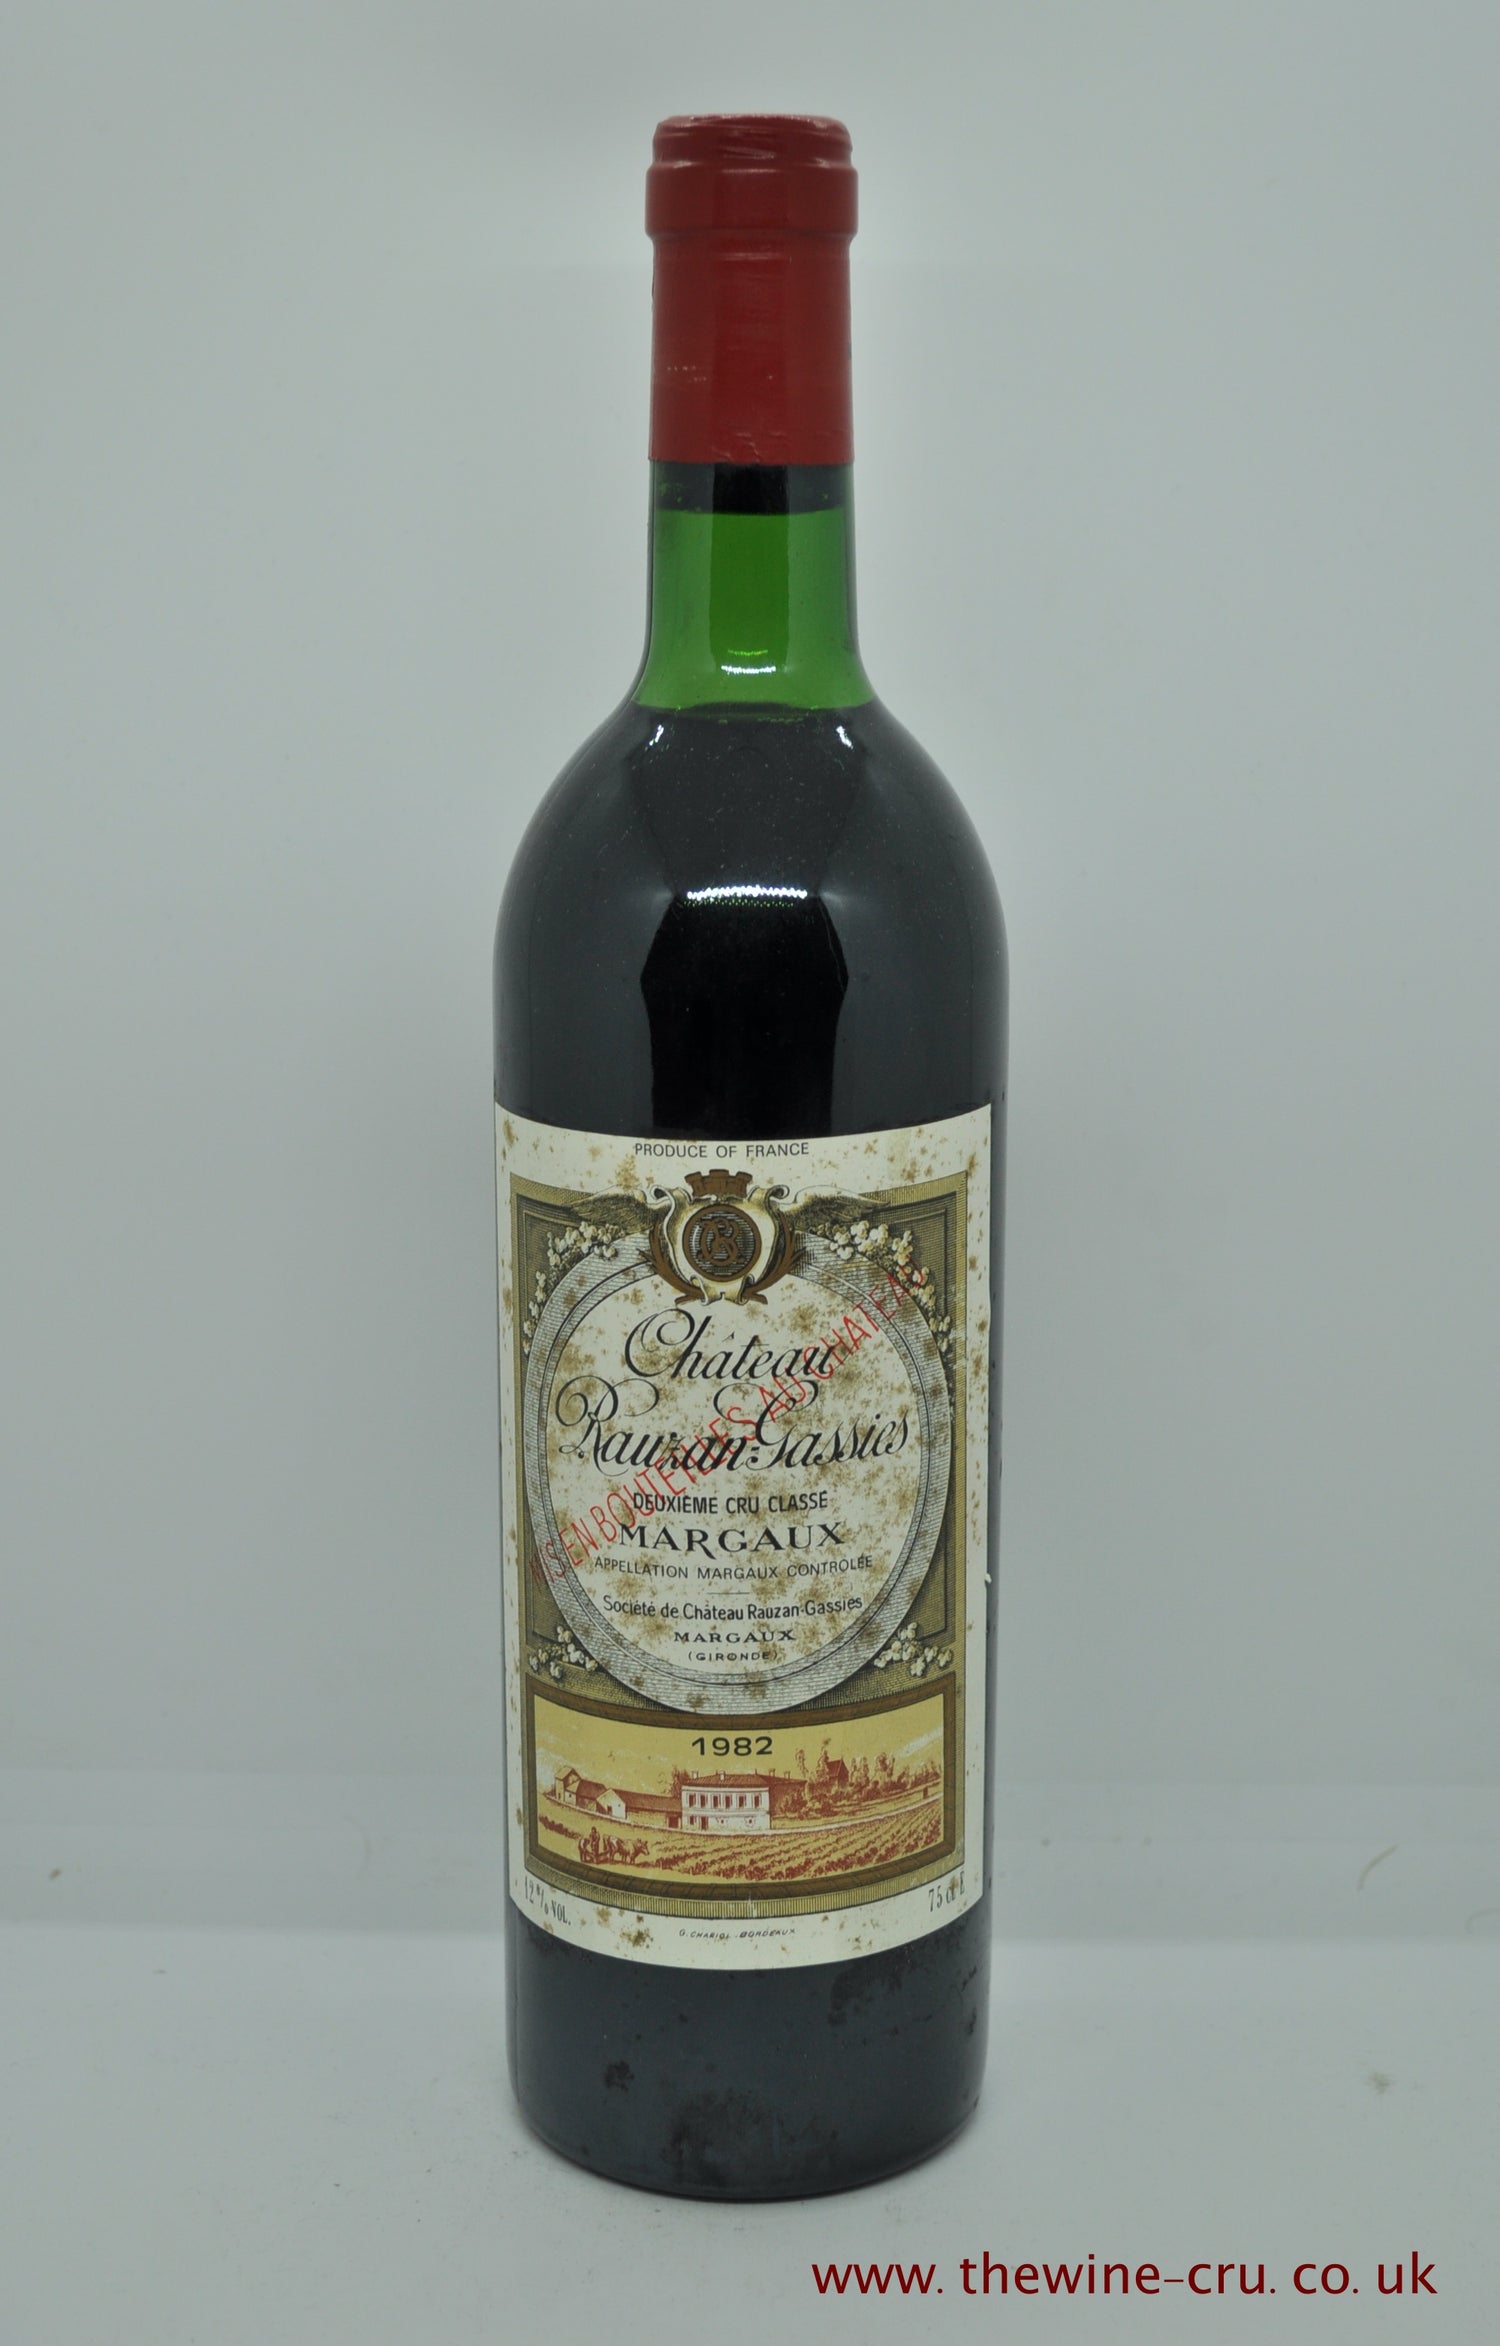 1982 vintage red wine. Chateau Rauzan gasses 1982, France, Bordeaux. The bottle is in good condition. Label a little bin soiled and the wine level is top shoulder. Immediate delivery. Free local delivery. Gift wrapping available.